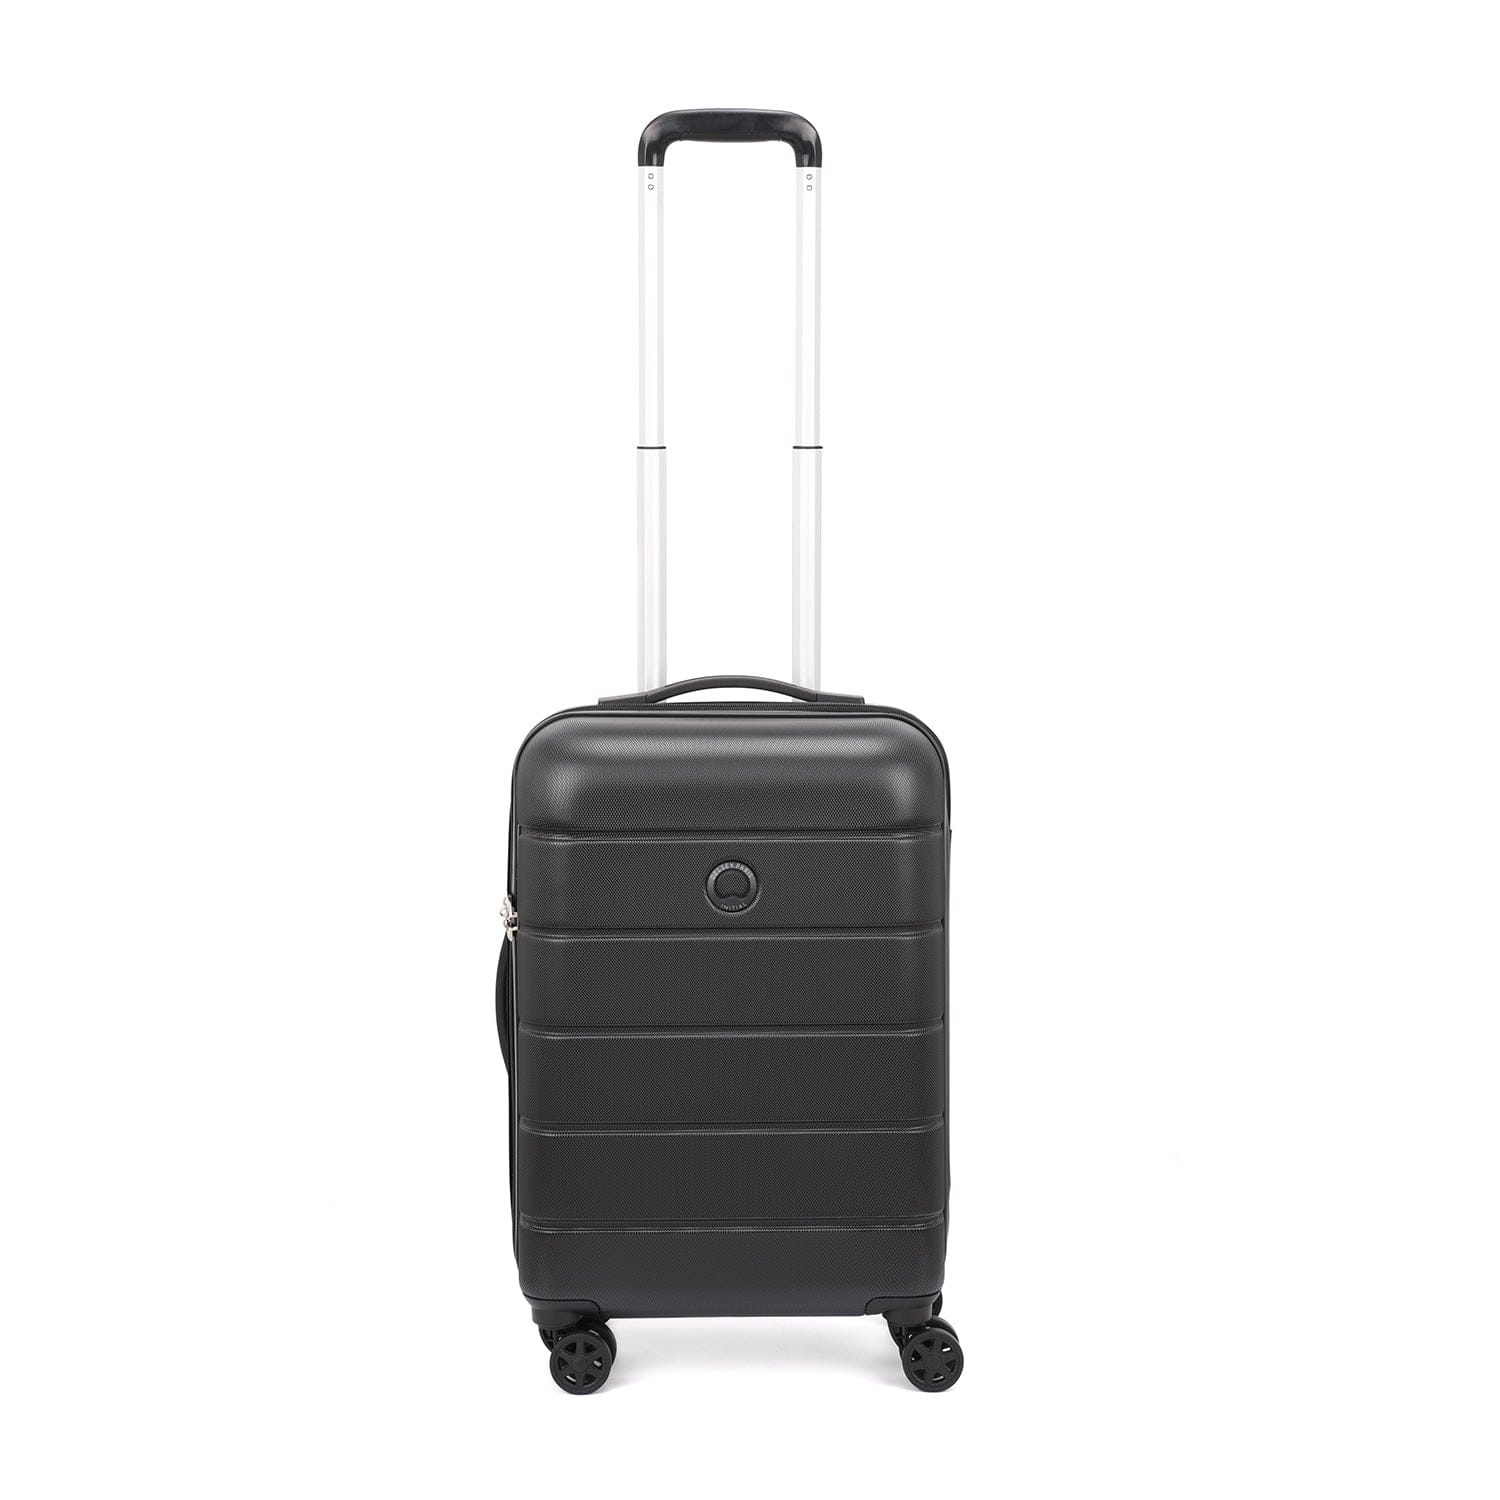 Delsey Lagos 2Piece SET 55+76cm Hardcase 4 Double Wheel Cabin & Check-In Luggage Trolley Black + FREE Delsey Agreable Backpack